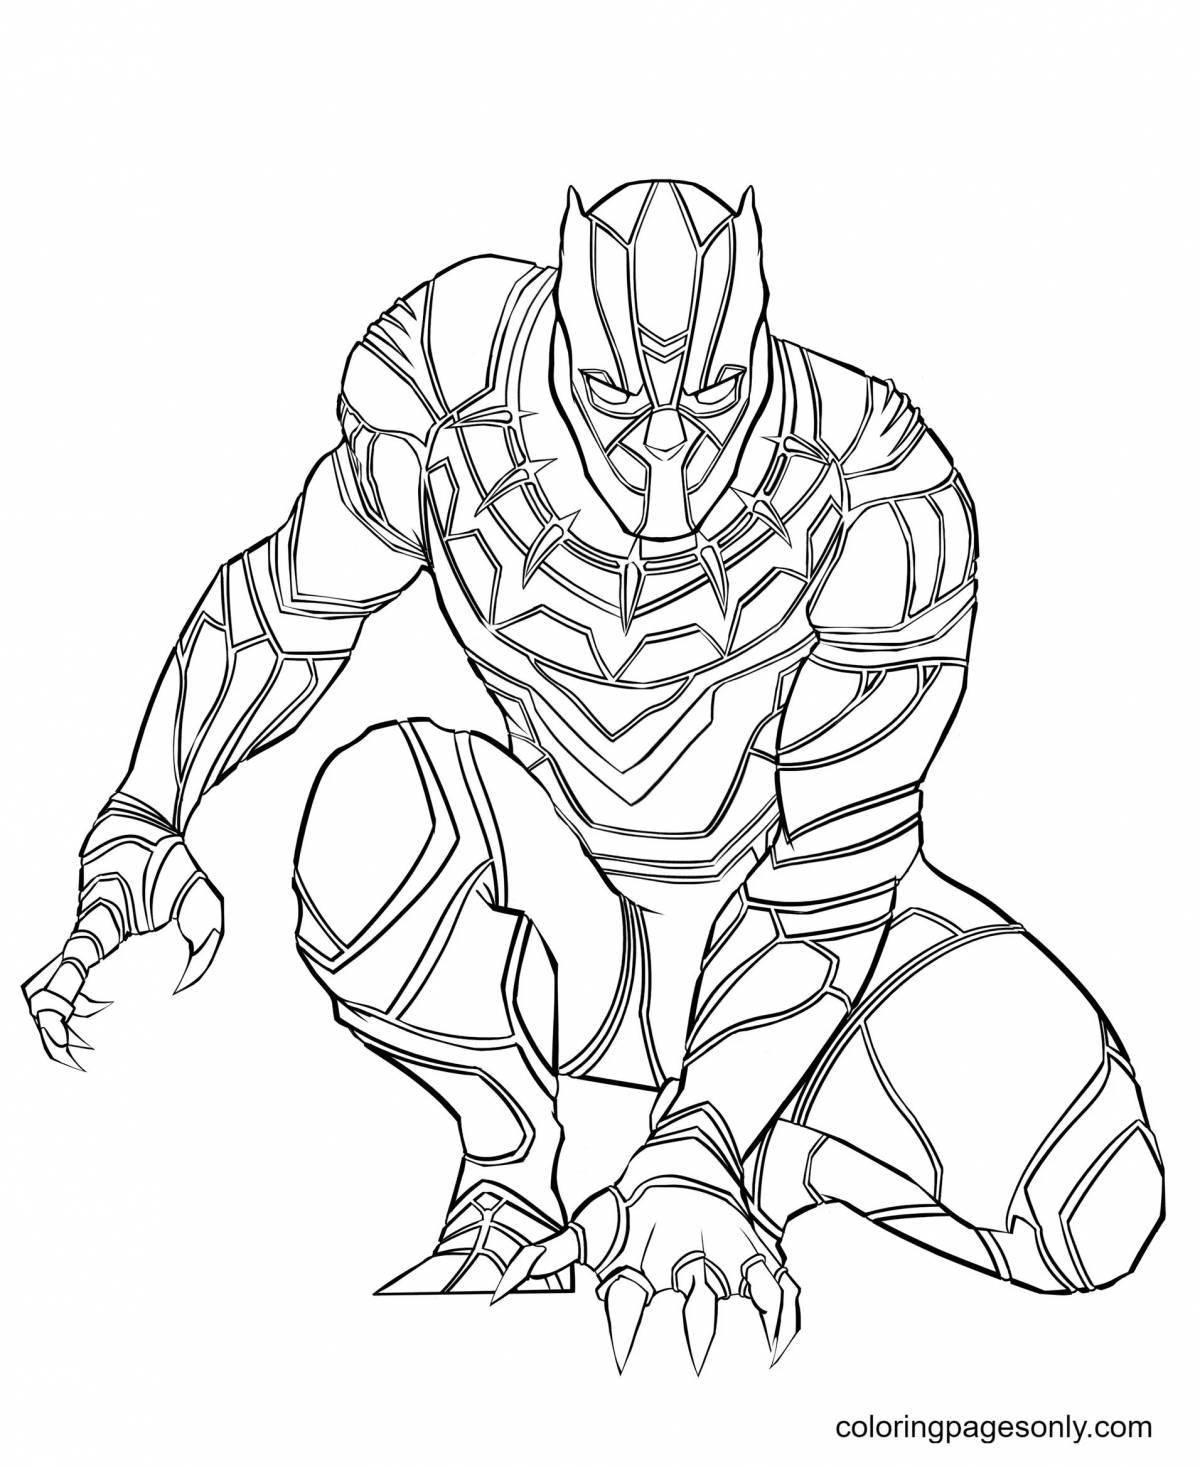 Marvel black panther dazzle coloring book